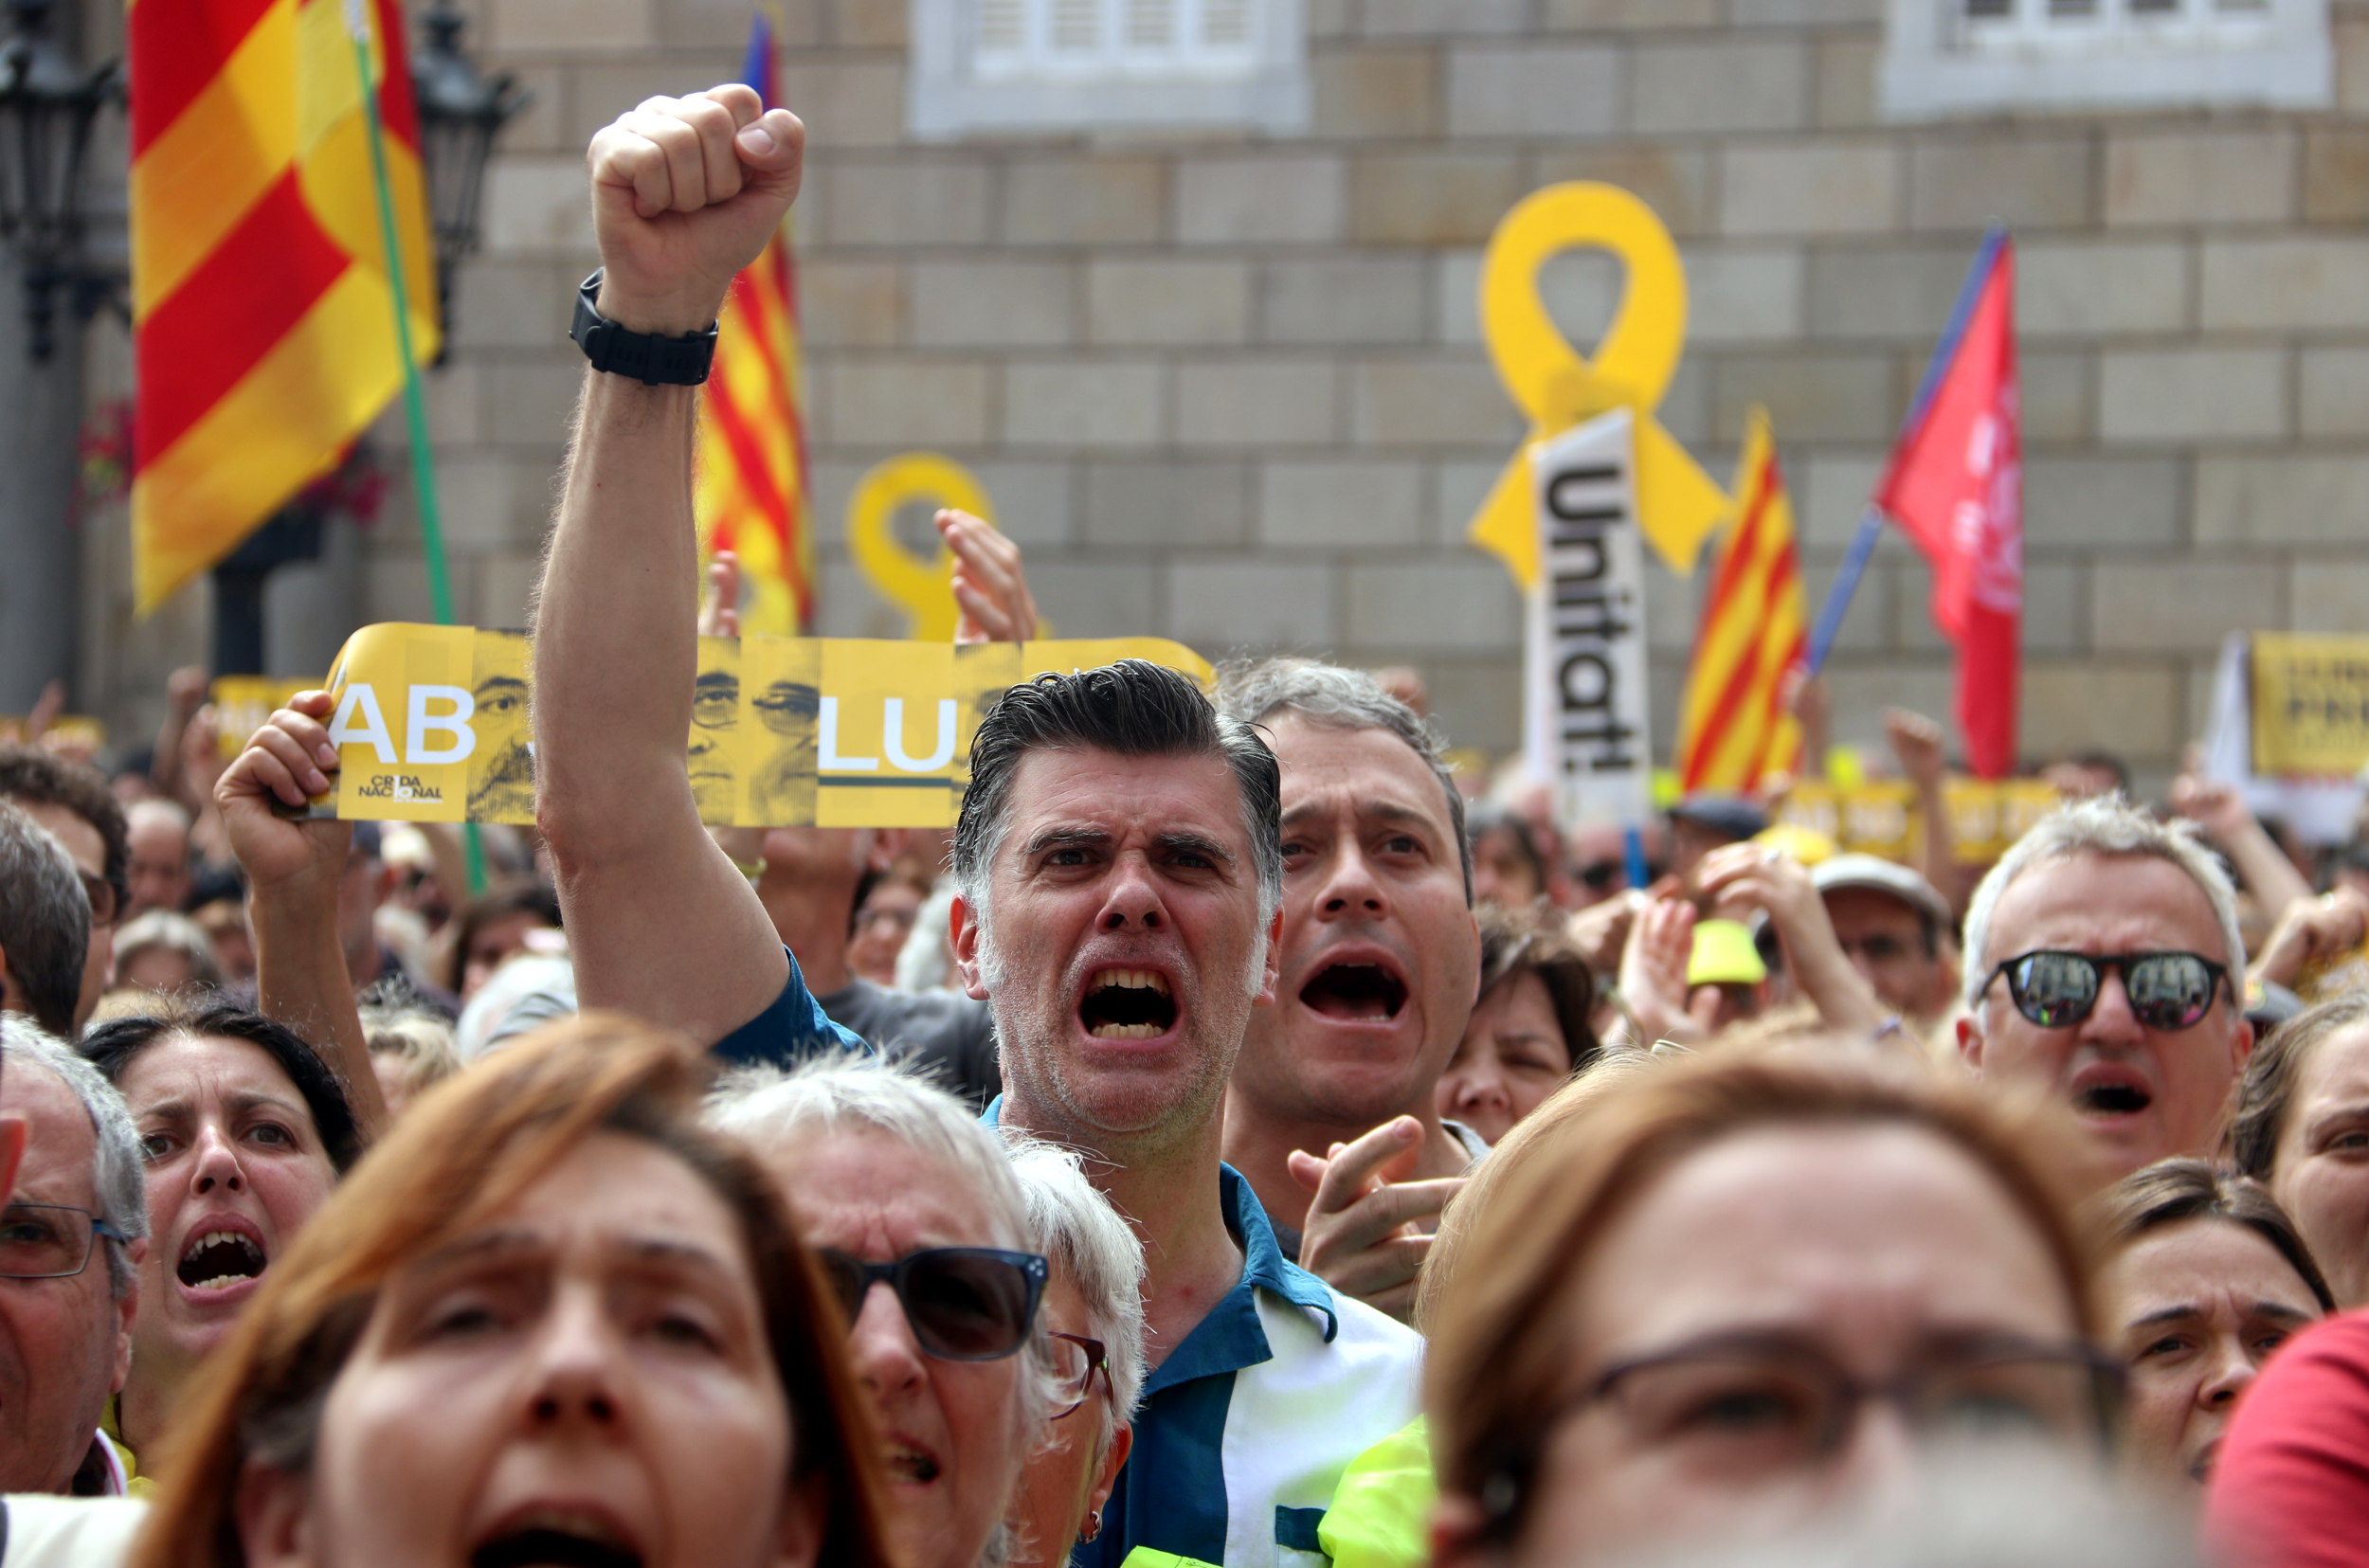 Pro-independence supporters outside of the Barcelona city council (by Pau Cortina)